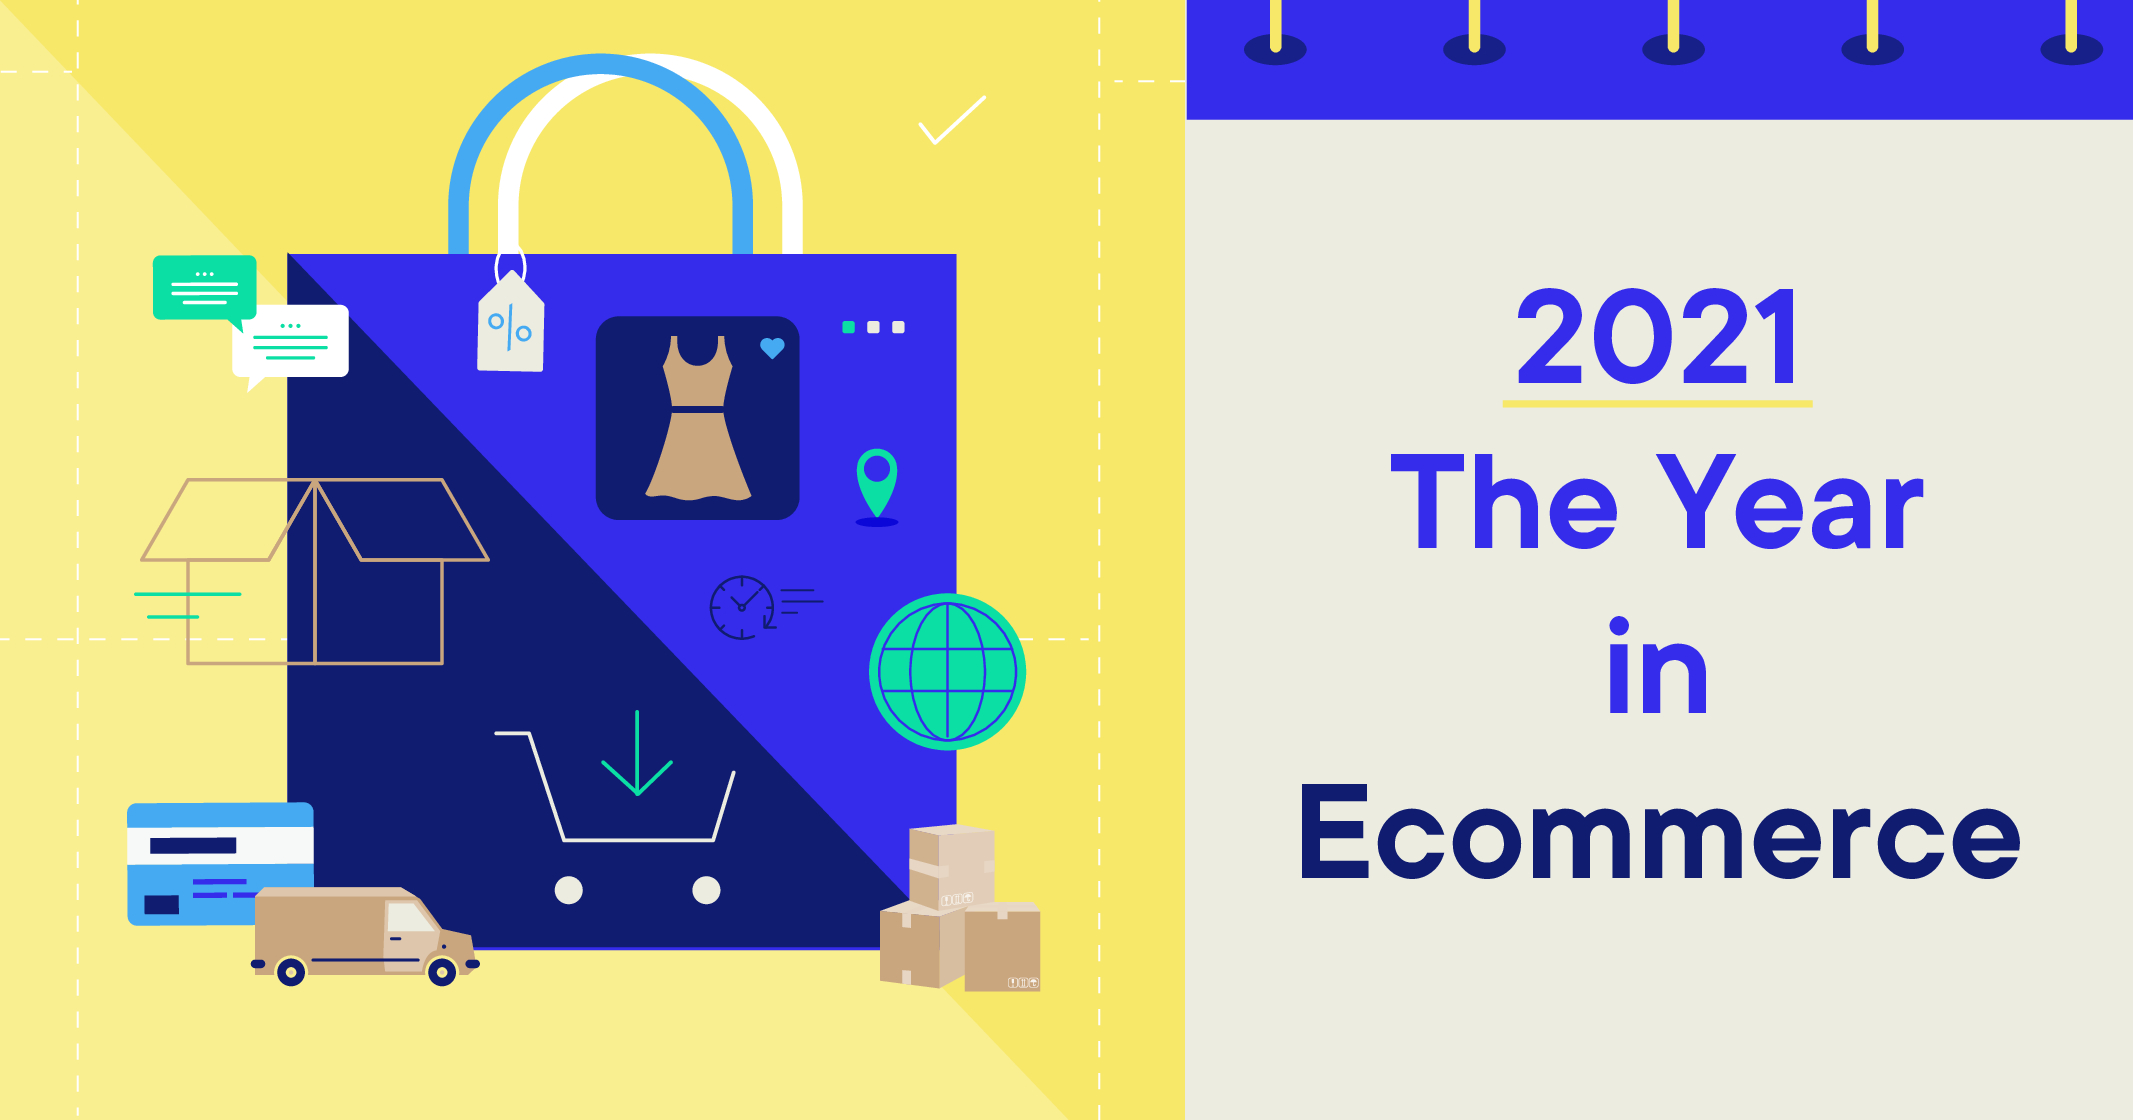 Looking Back at Ecommerce in 2021